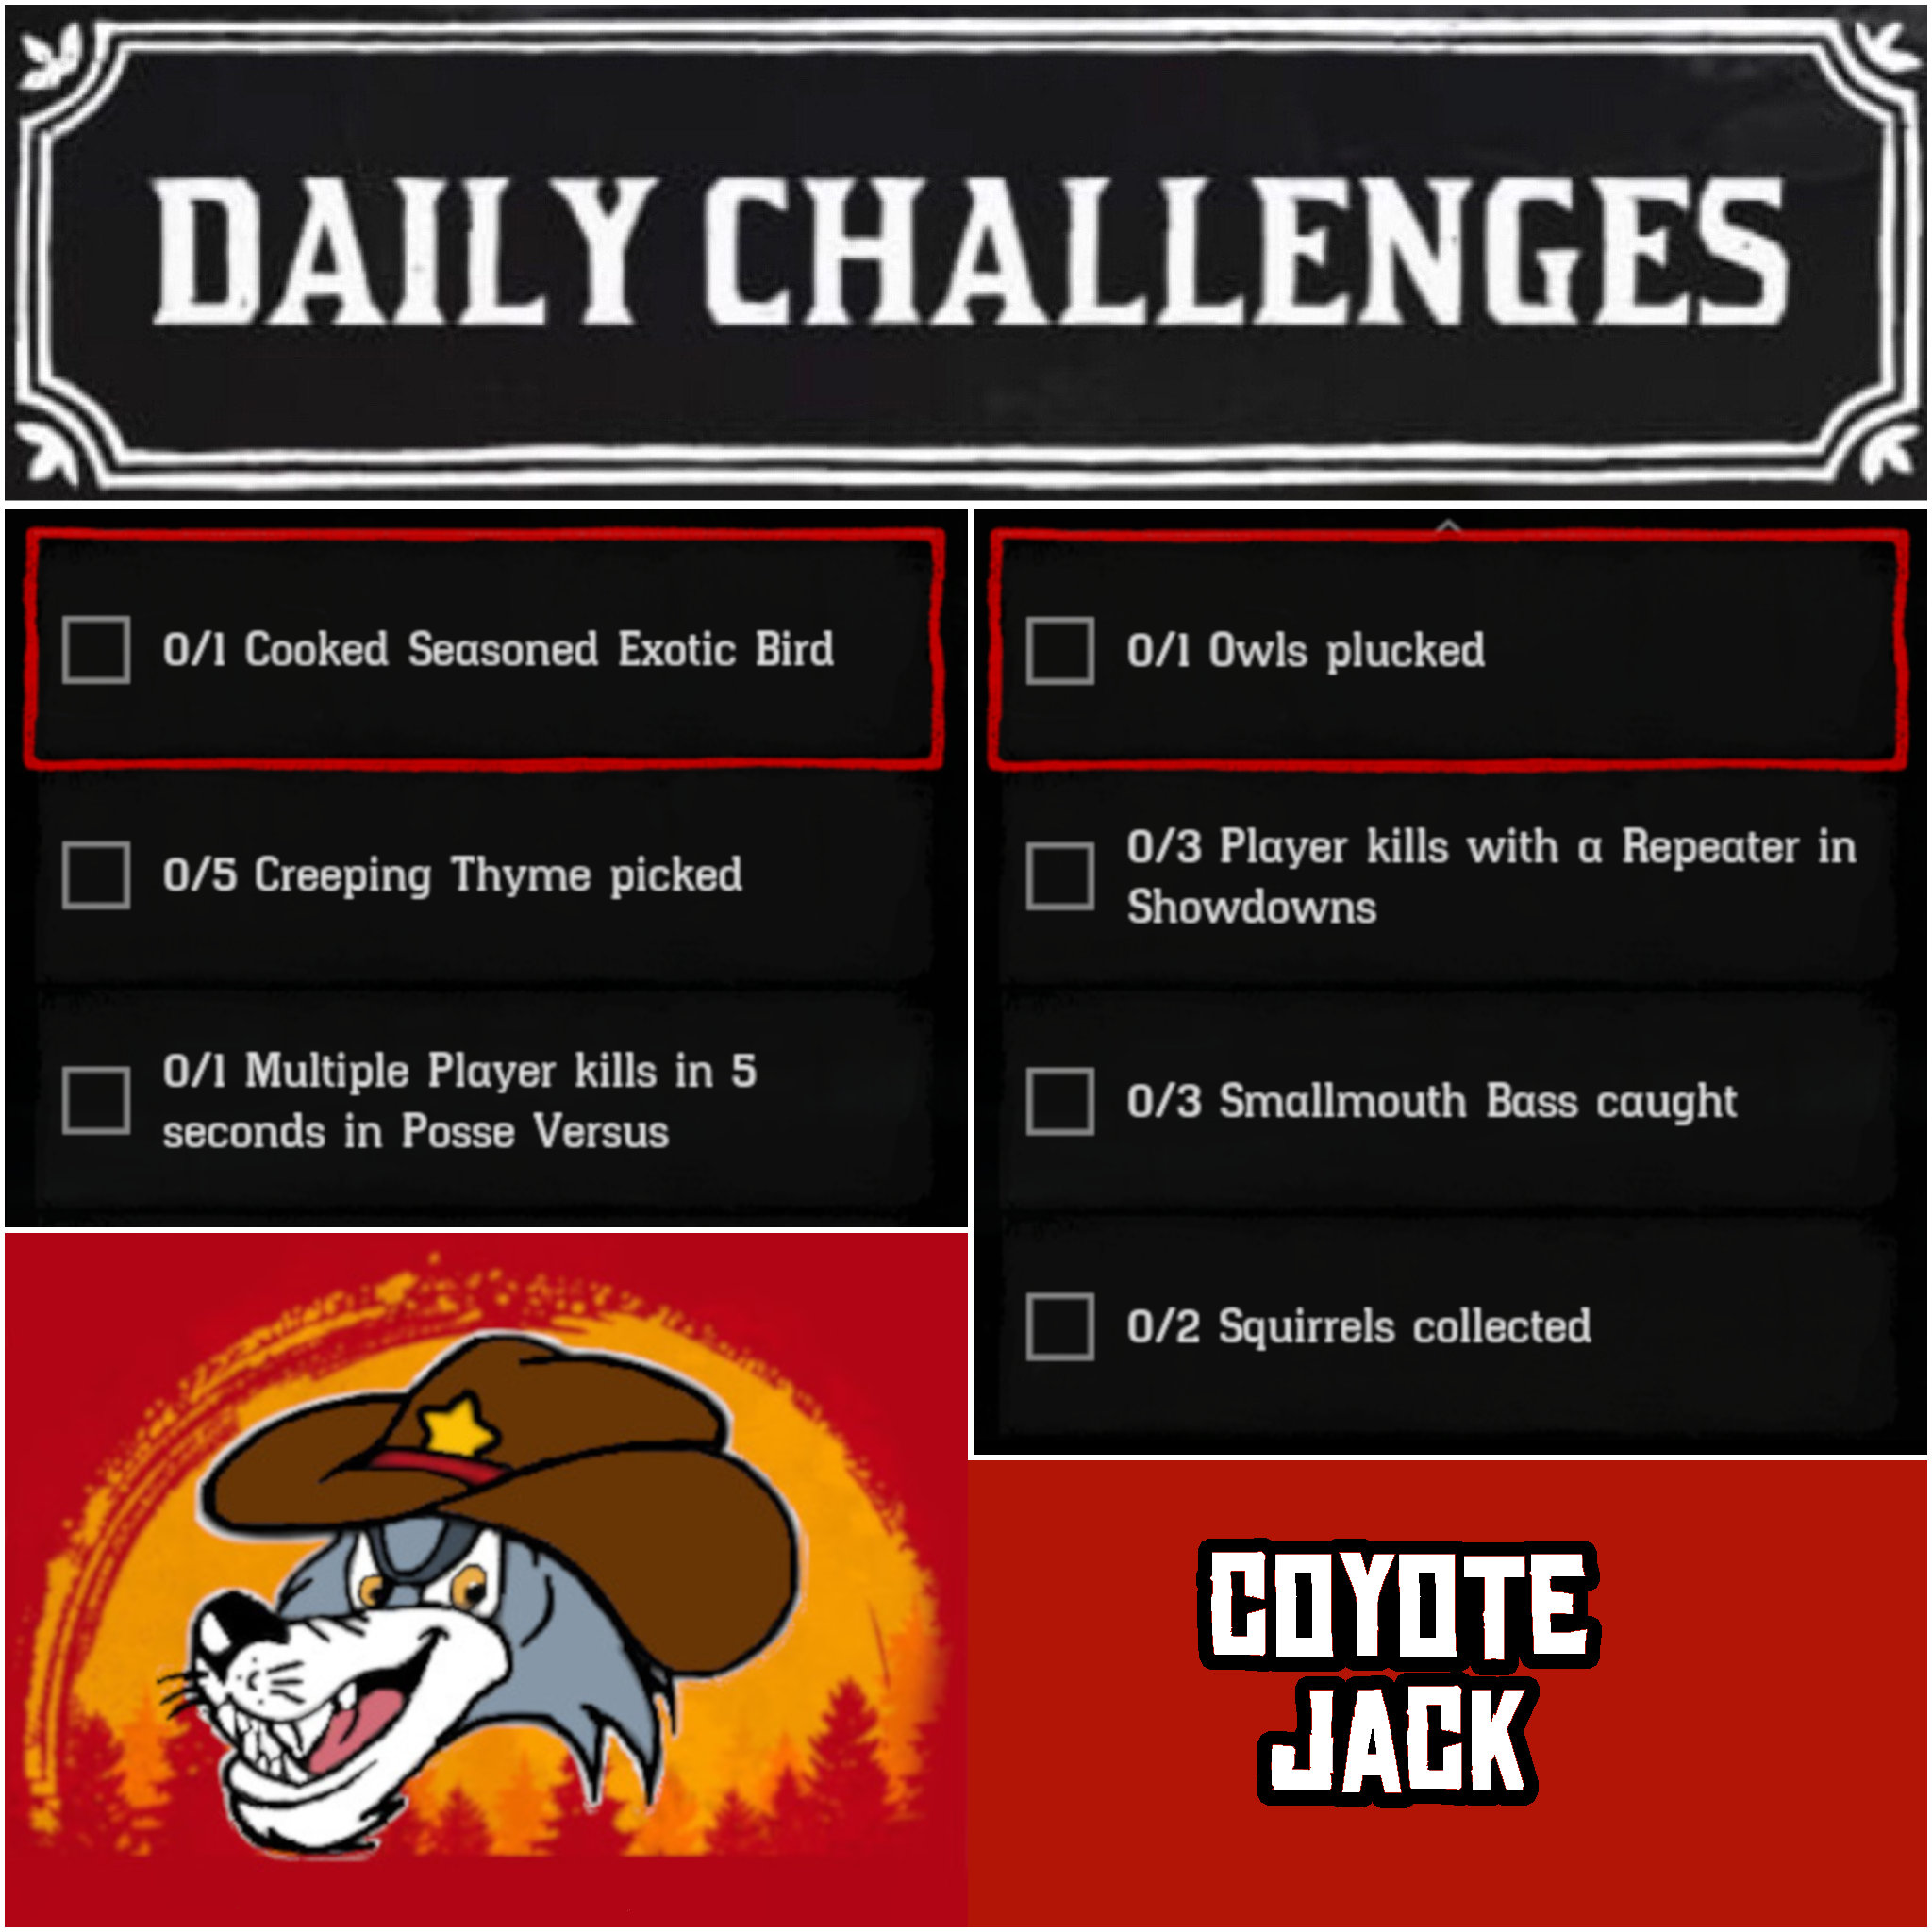 You are currently viewing Tuesday 03 November Daily Challenges